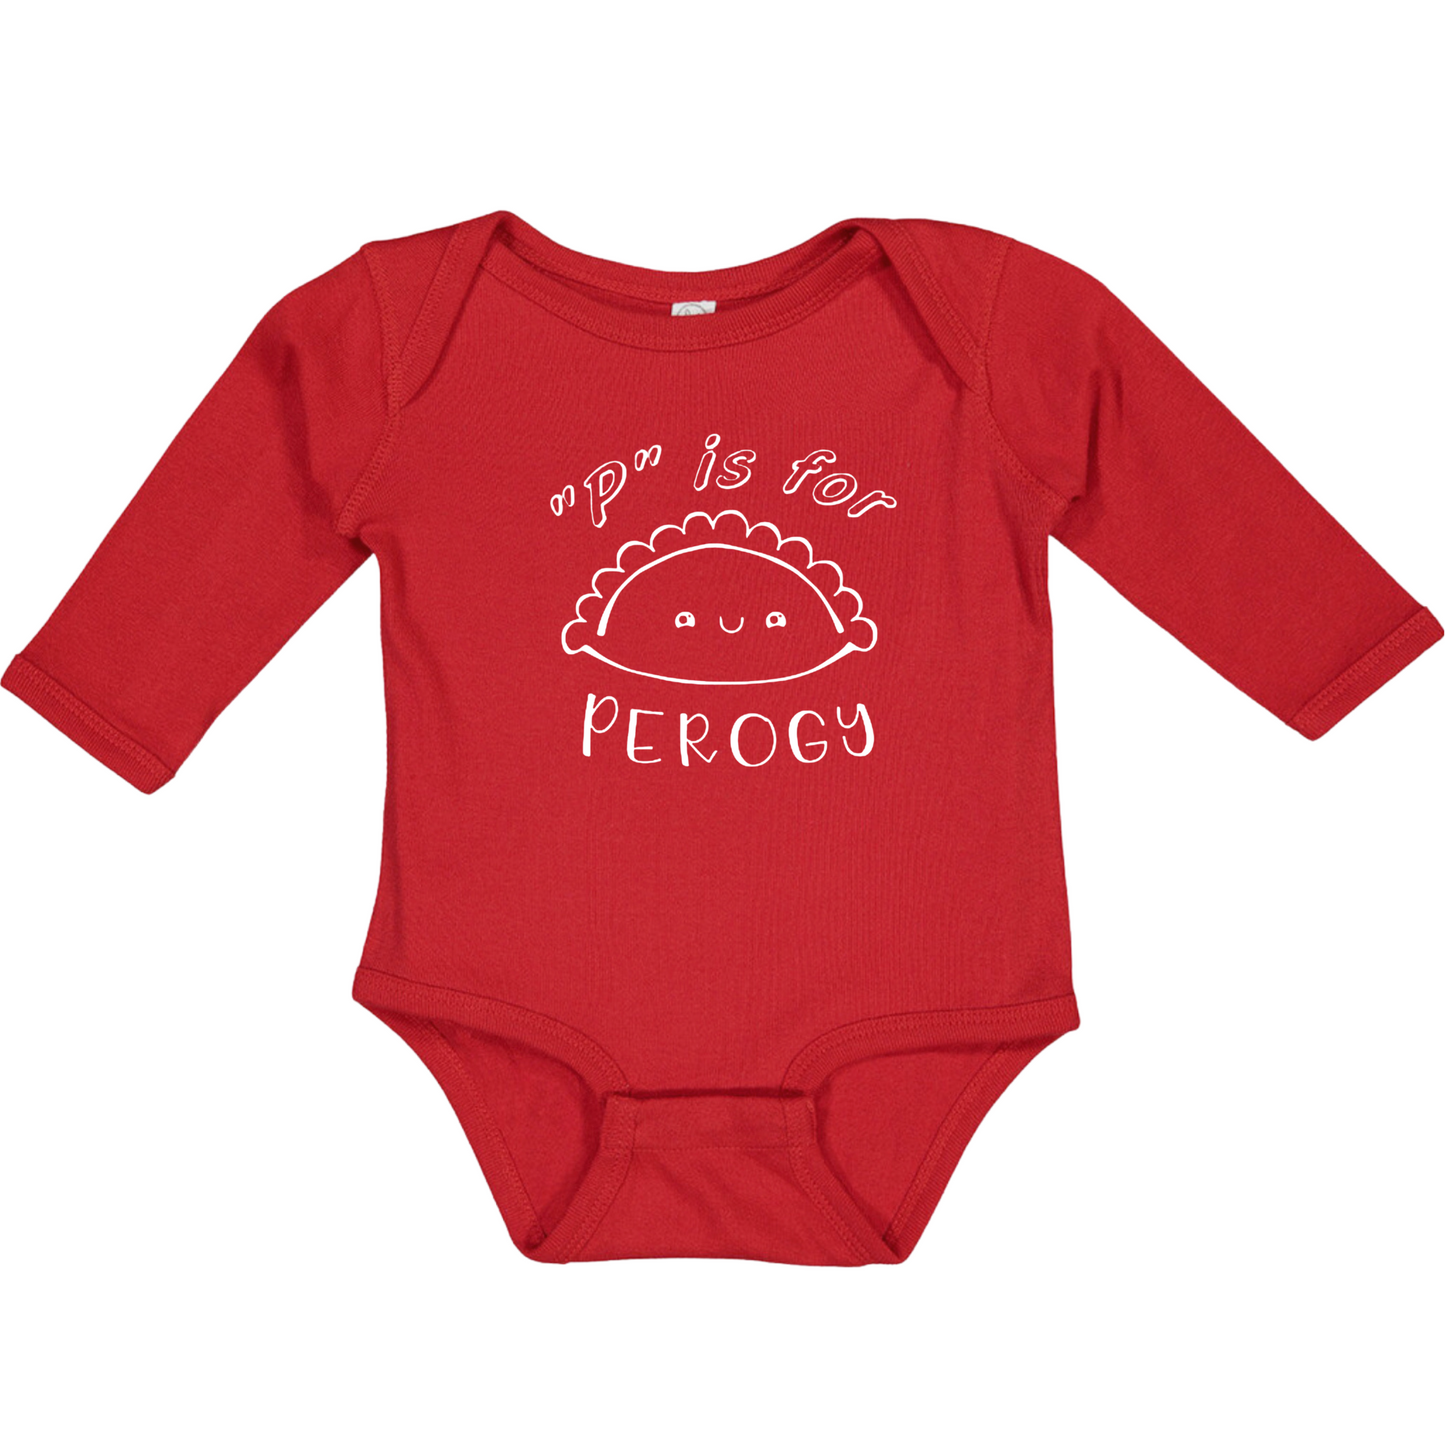 “P” is for PEROGY (White Font) - Long Sleeve Onesie